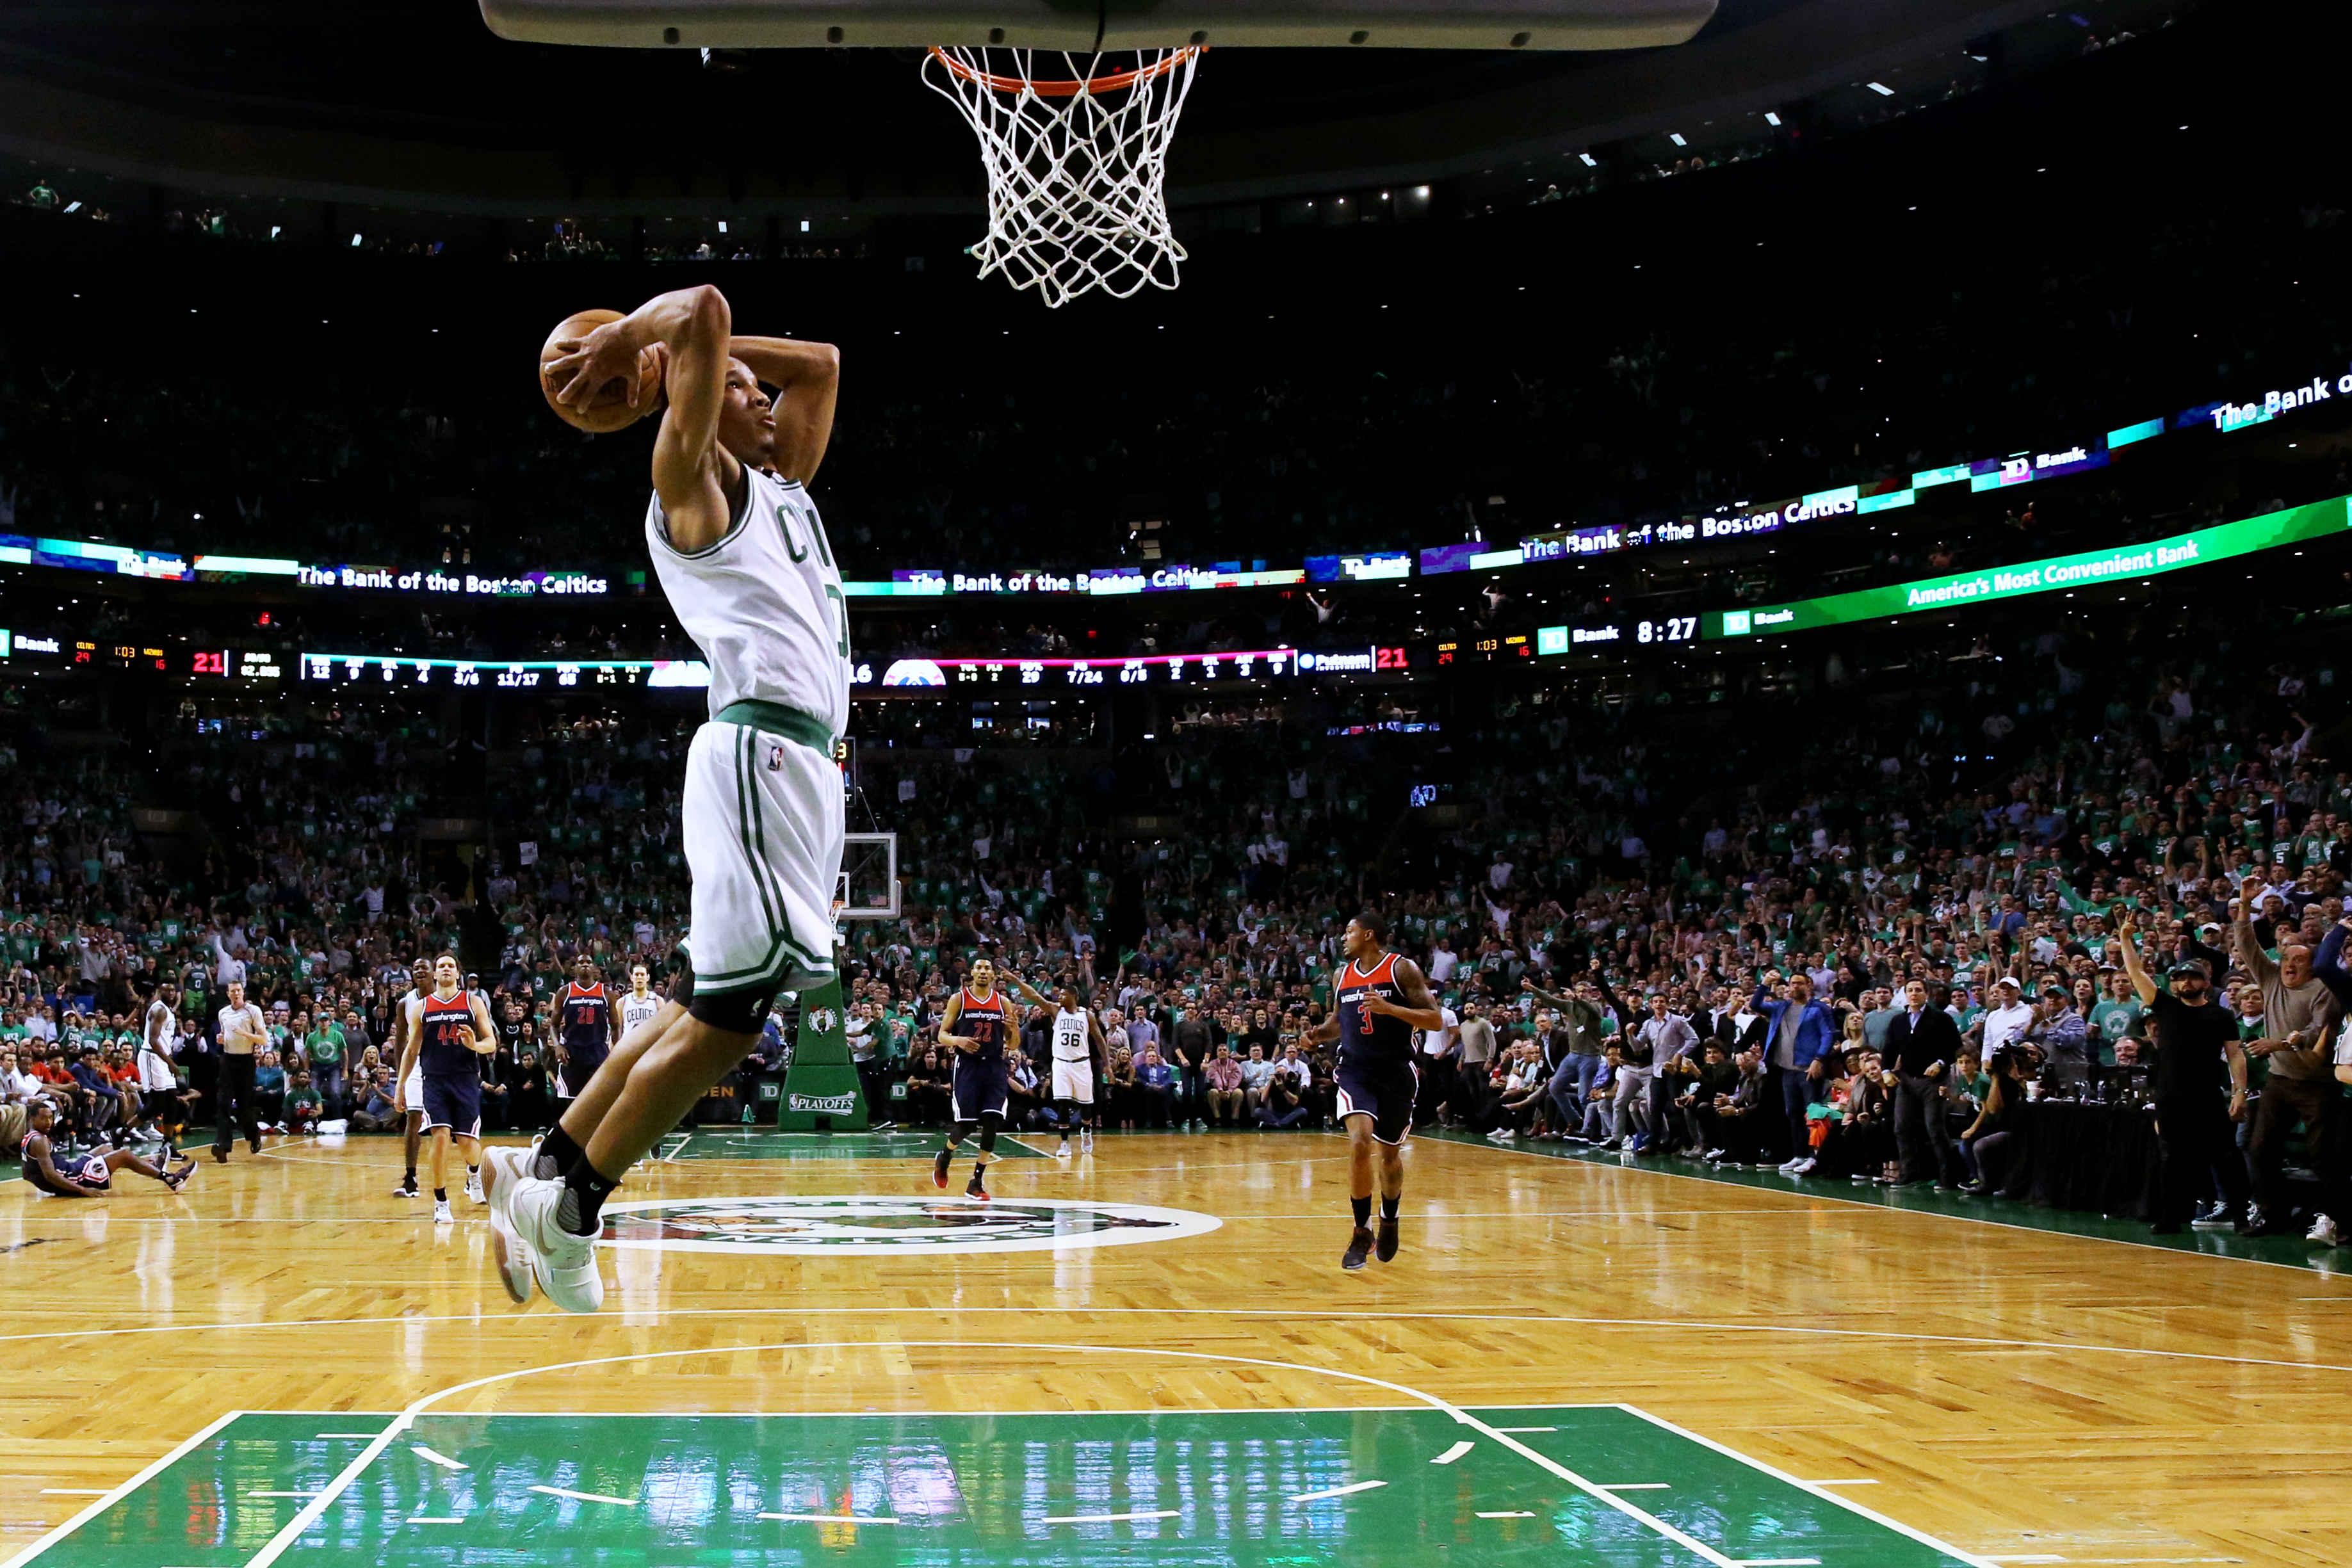 Letting Go Of Avery Bradley Was The Correct Call3673 x 2449